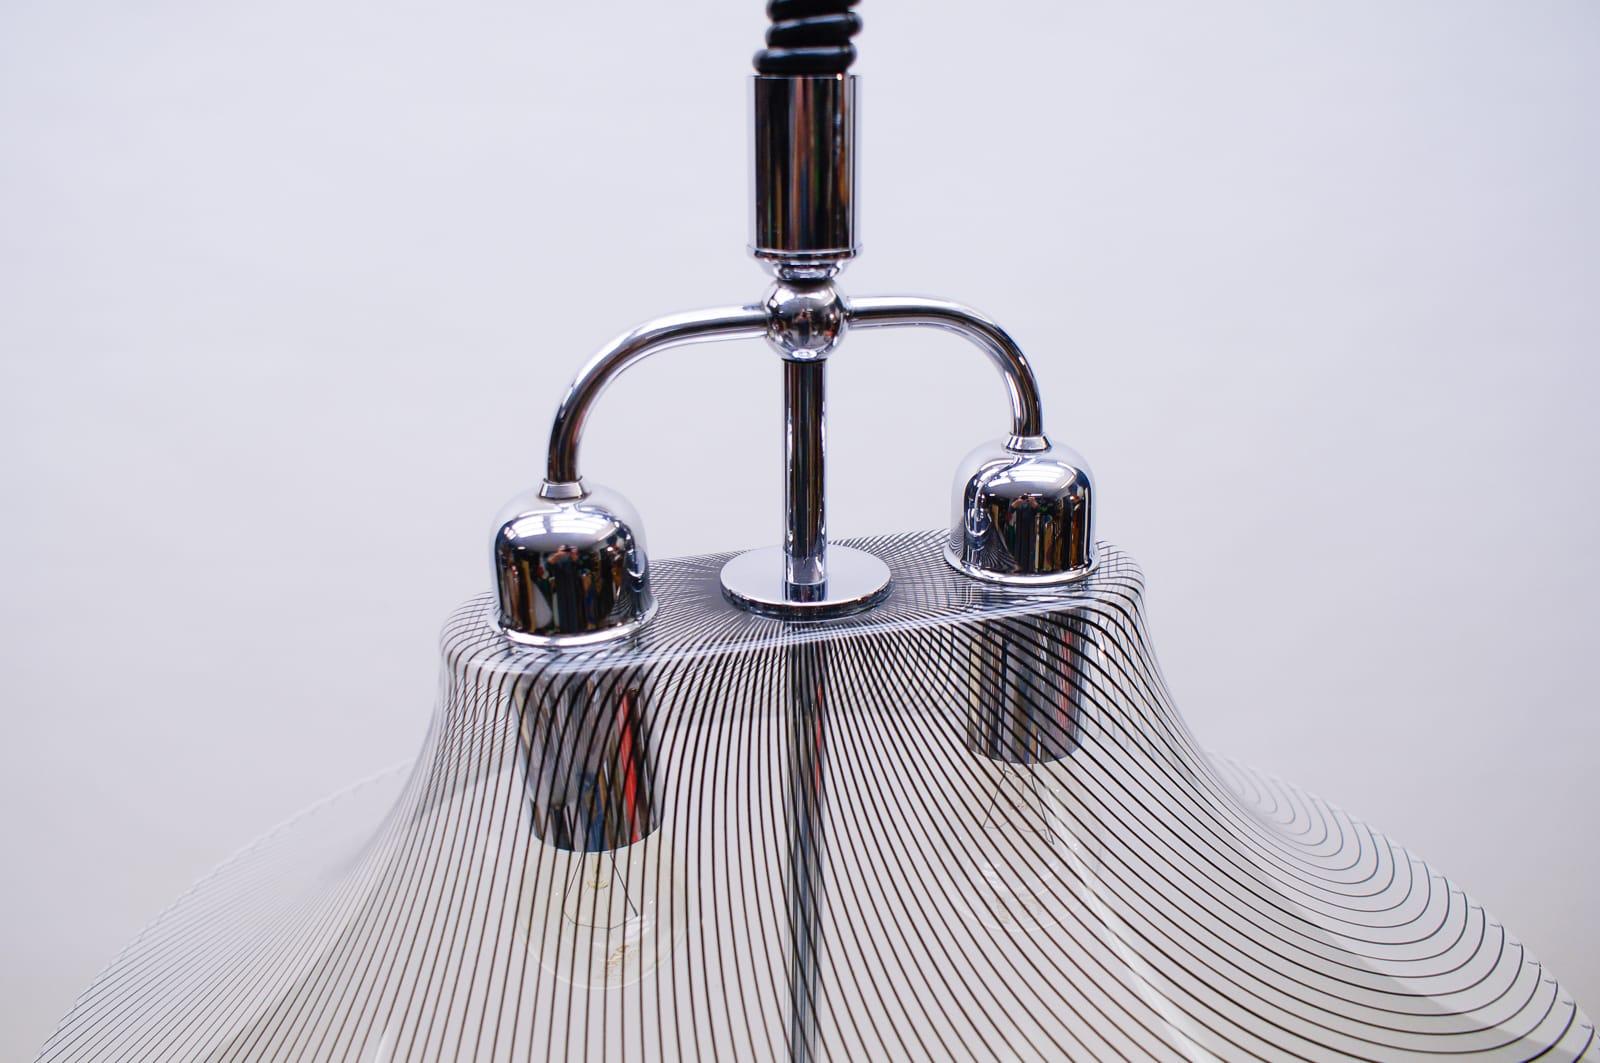 Metal Very Elegant Striped Acrylic Hanging Lamp by Edel-Acryl, 1970s For Sale